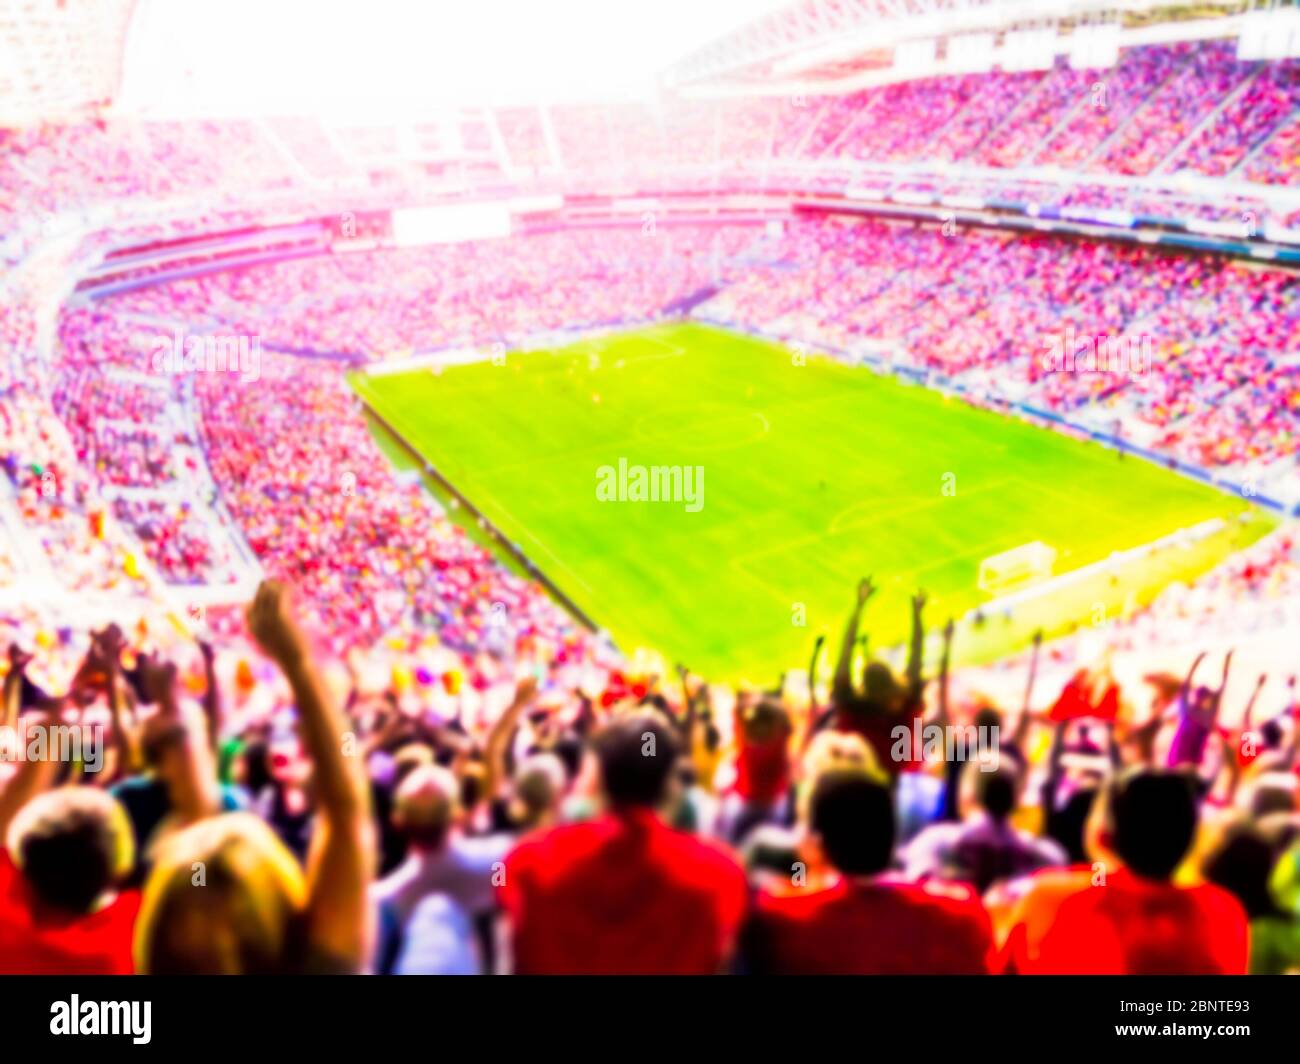 Football- soccer fans cheer their team and celebrate goal in full stadium with open air  with bright lighting beam     -blurred. Stock Photo